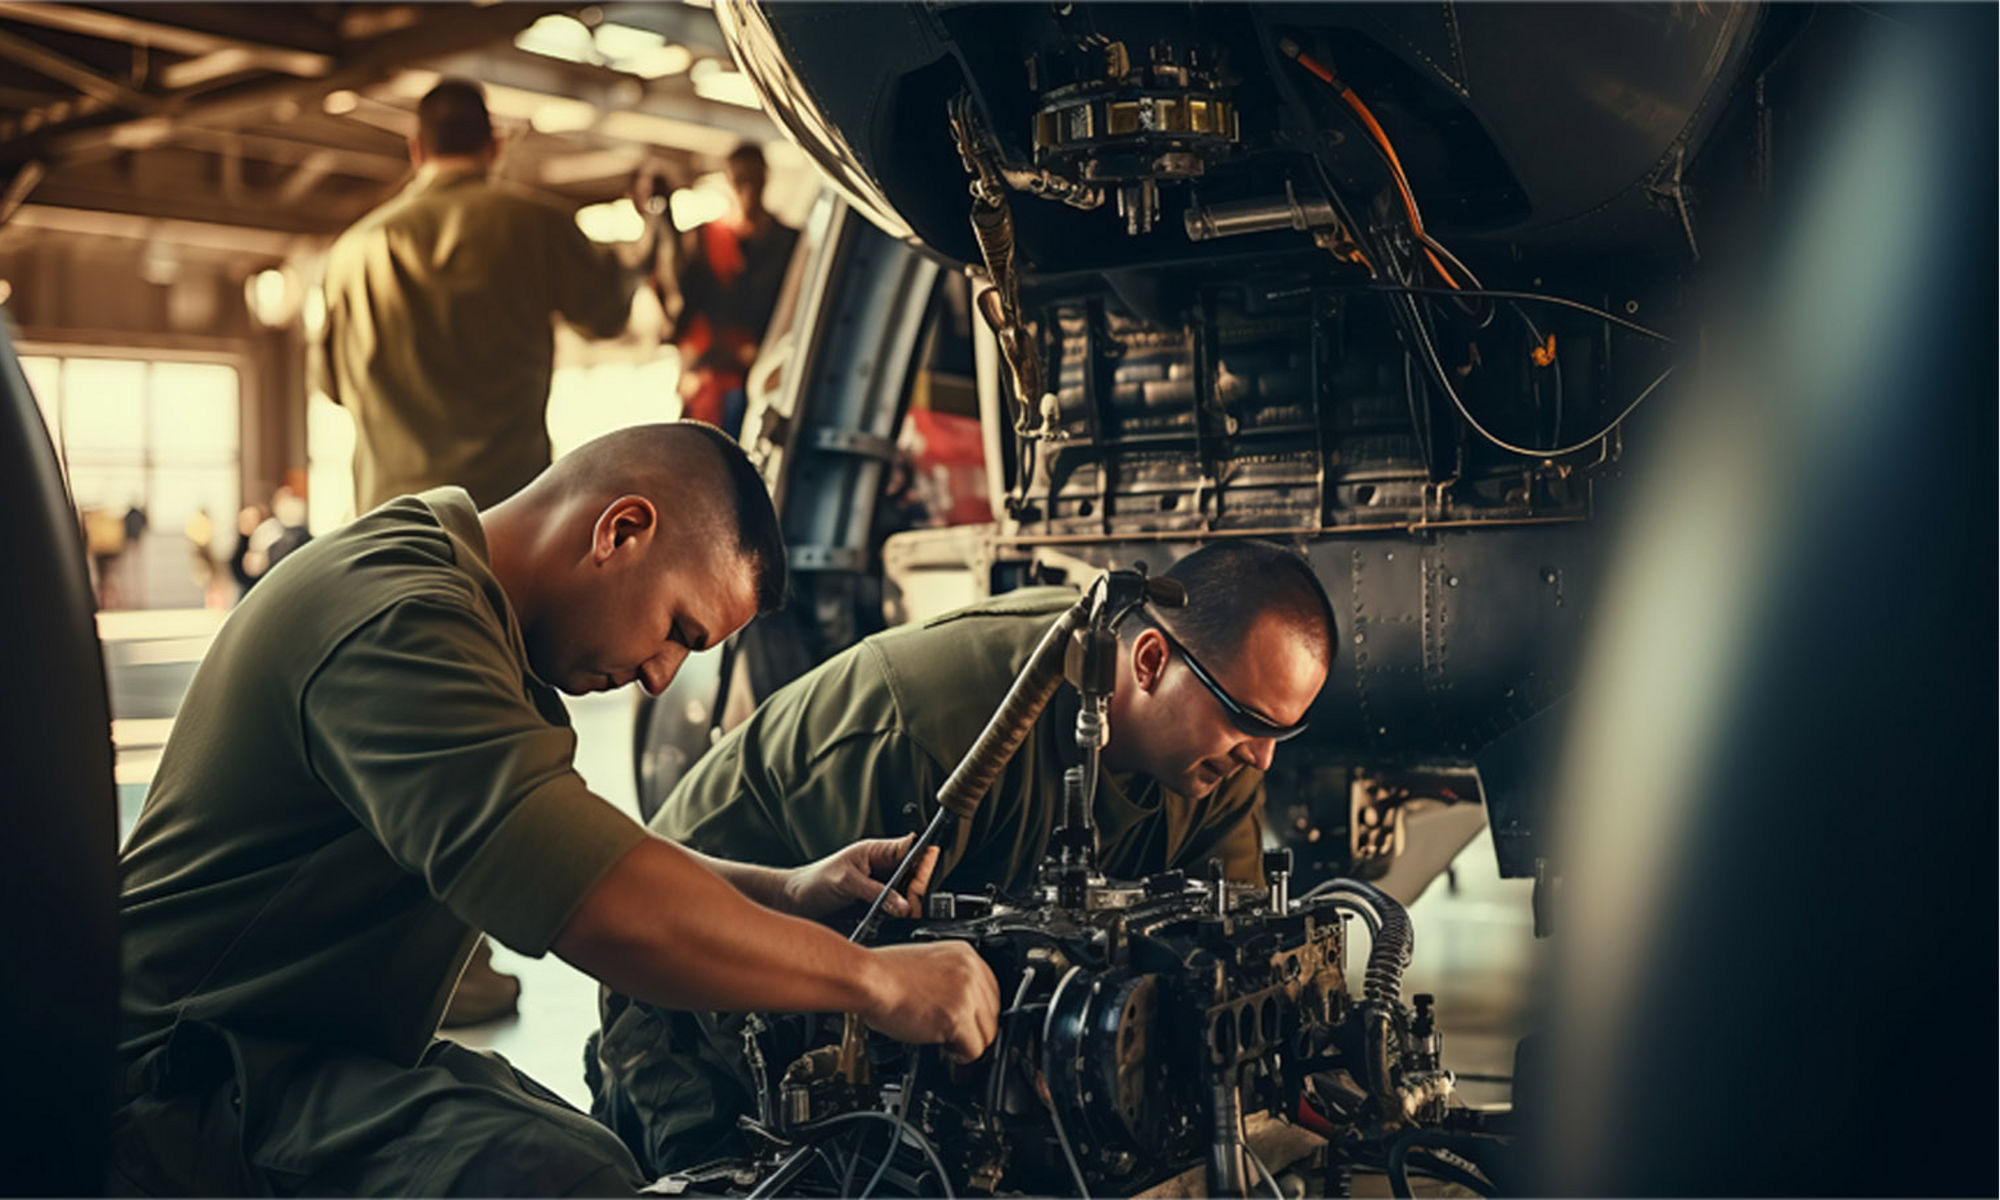 Two veterans on the job working on military helicopter equipmenT